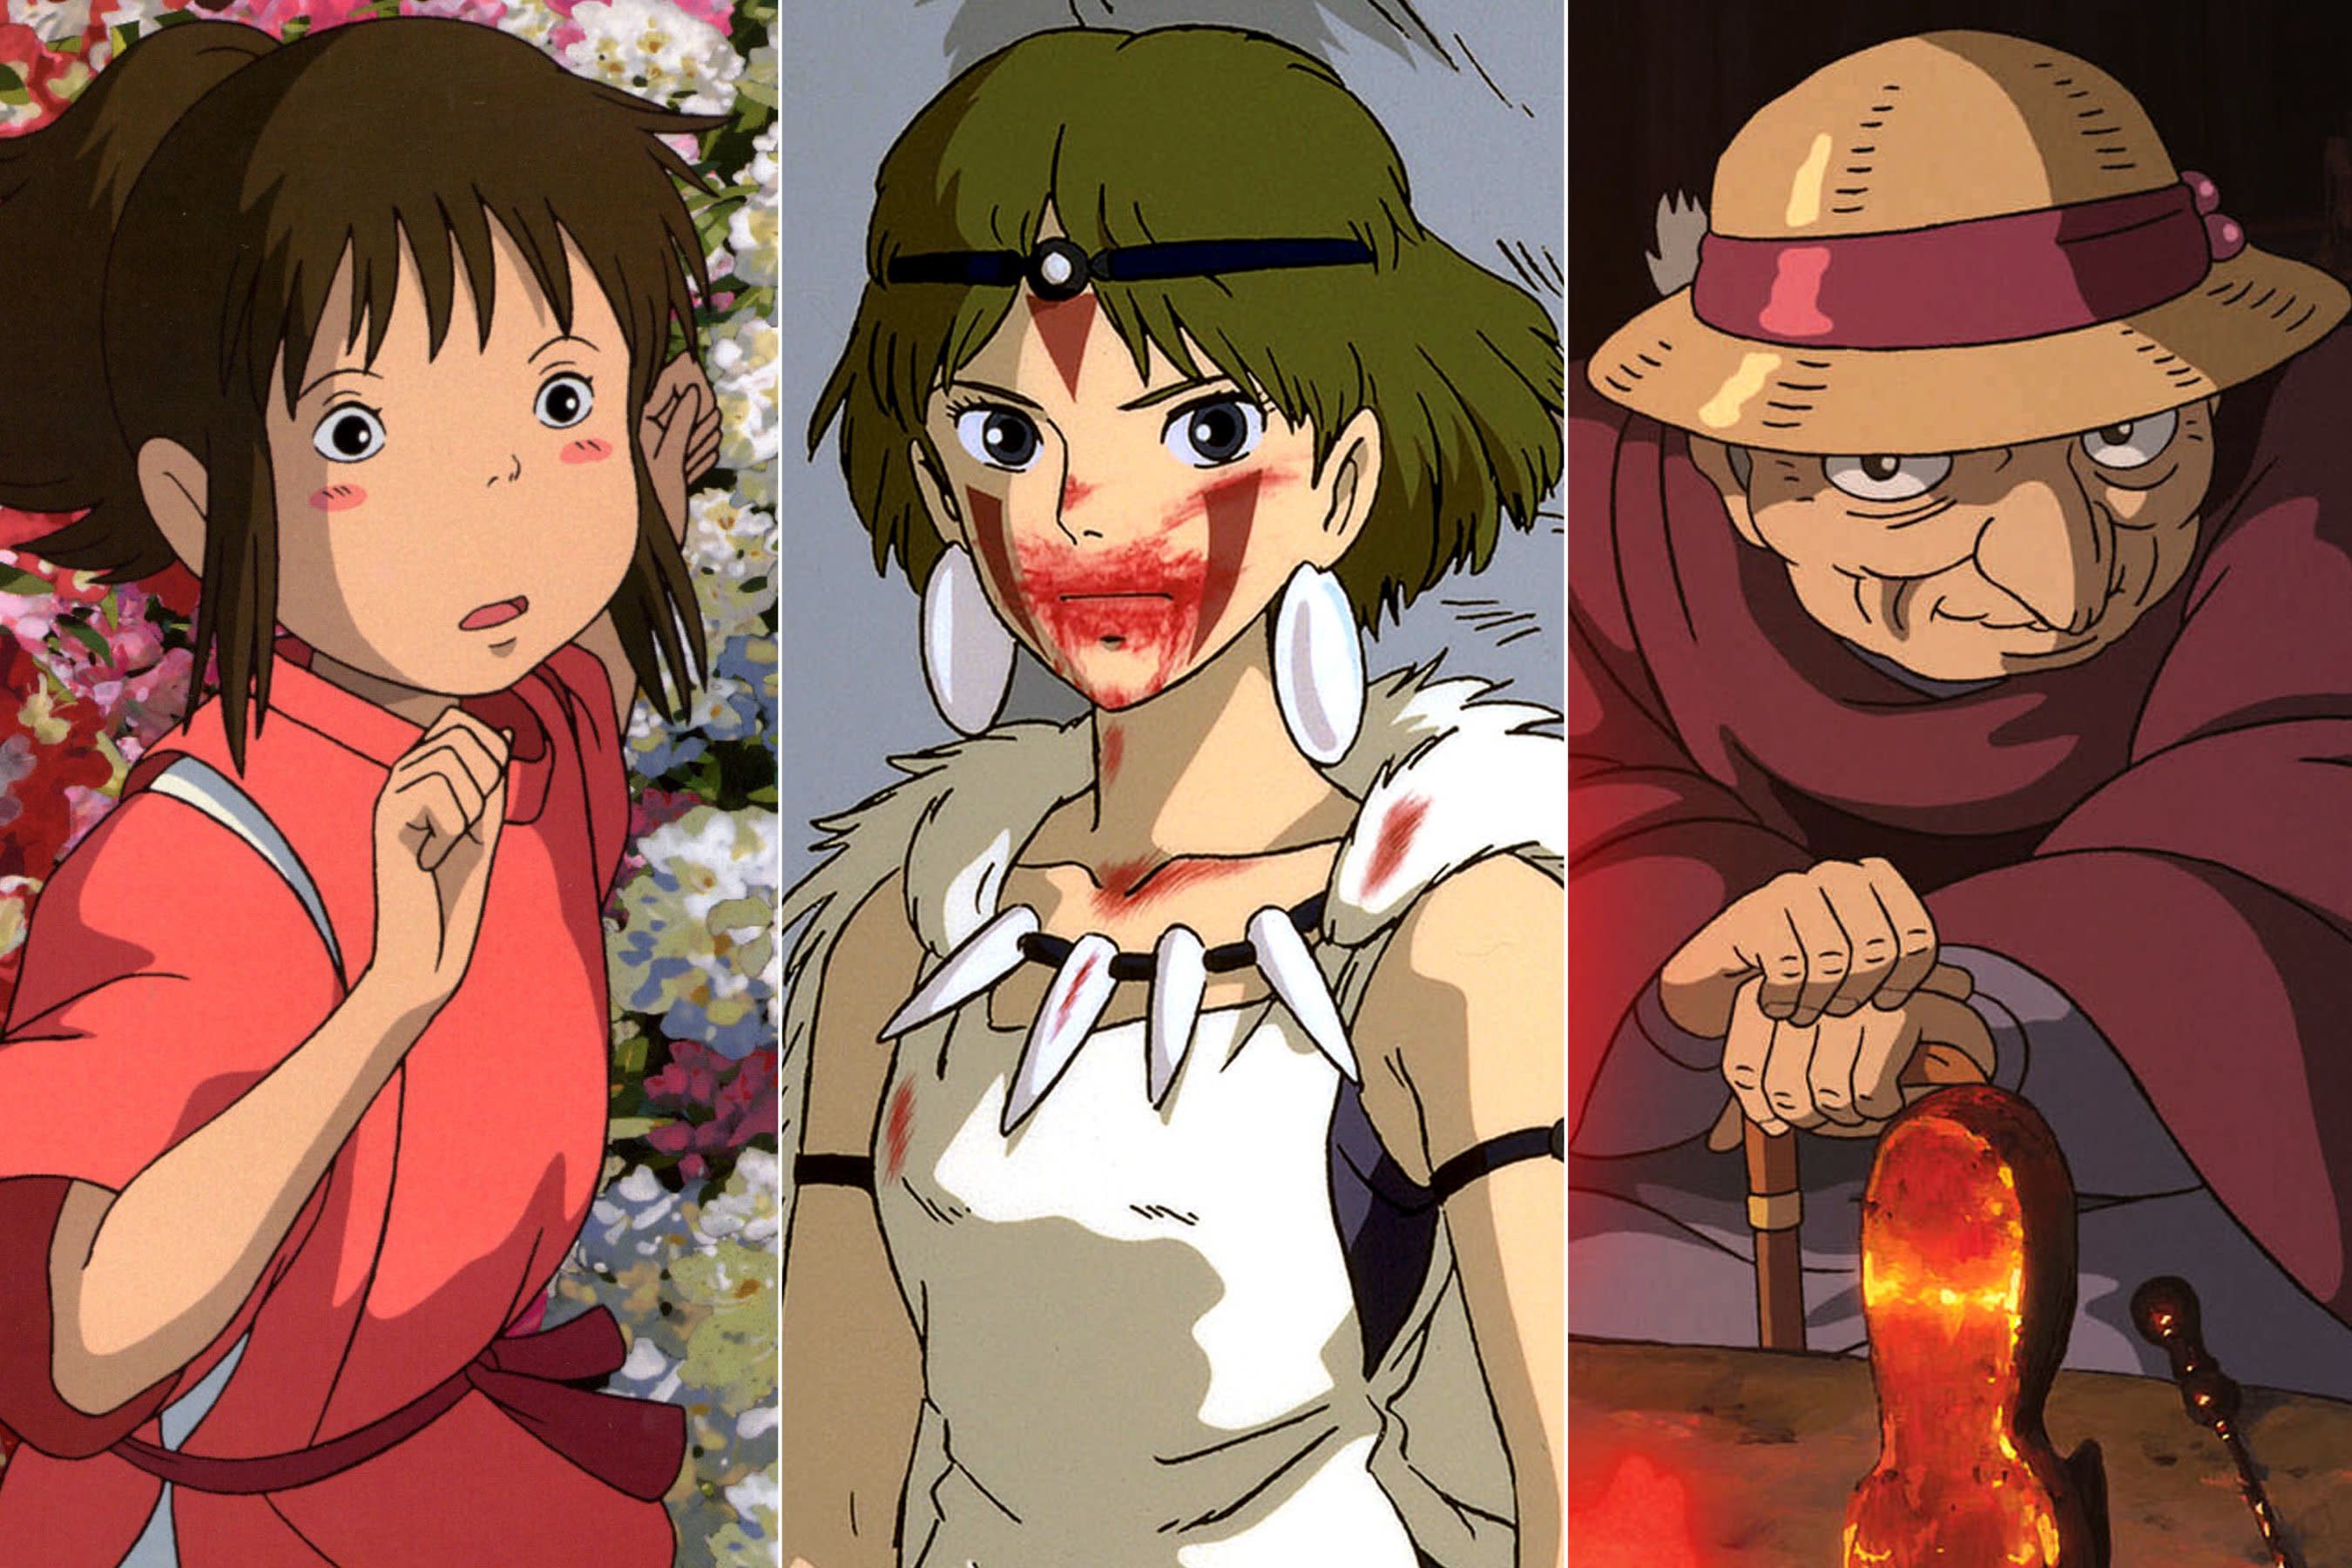 All of Studio Ghibli’s animated films, including Spirited Away, are coming to HBO Max